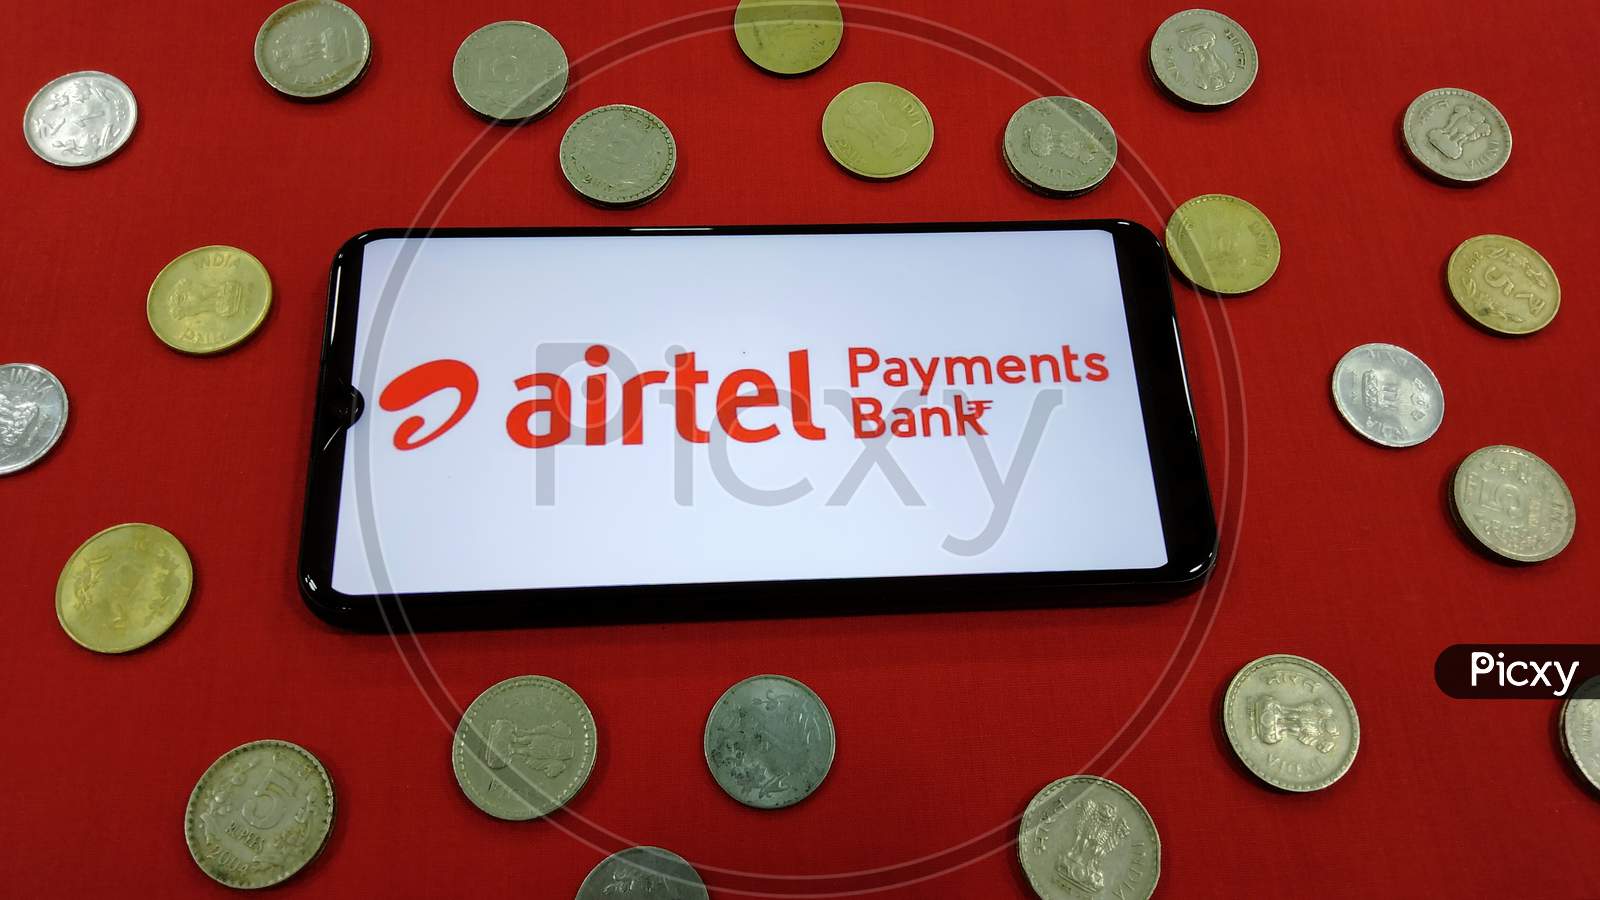 Tamilnadu, India- February 15 2021:Indian currency along with Airtel payments bank logo on a smart phone